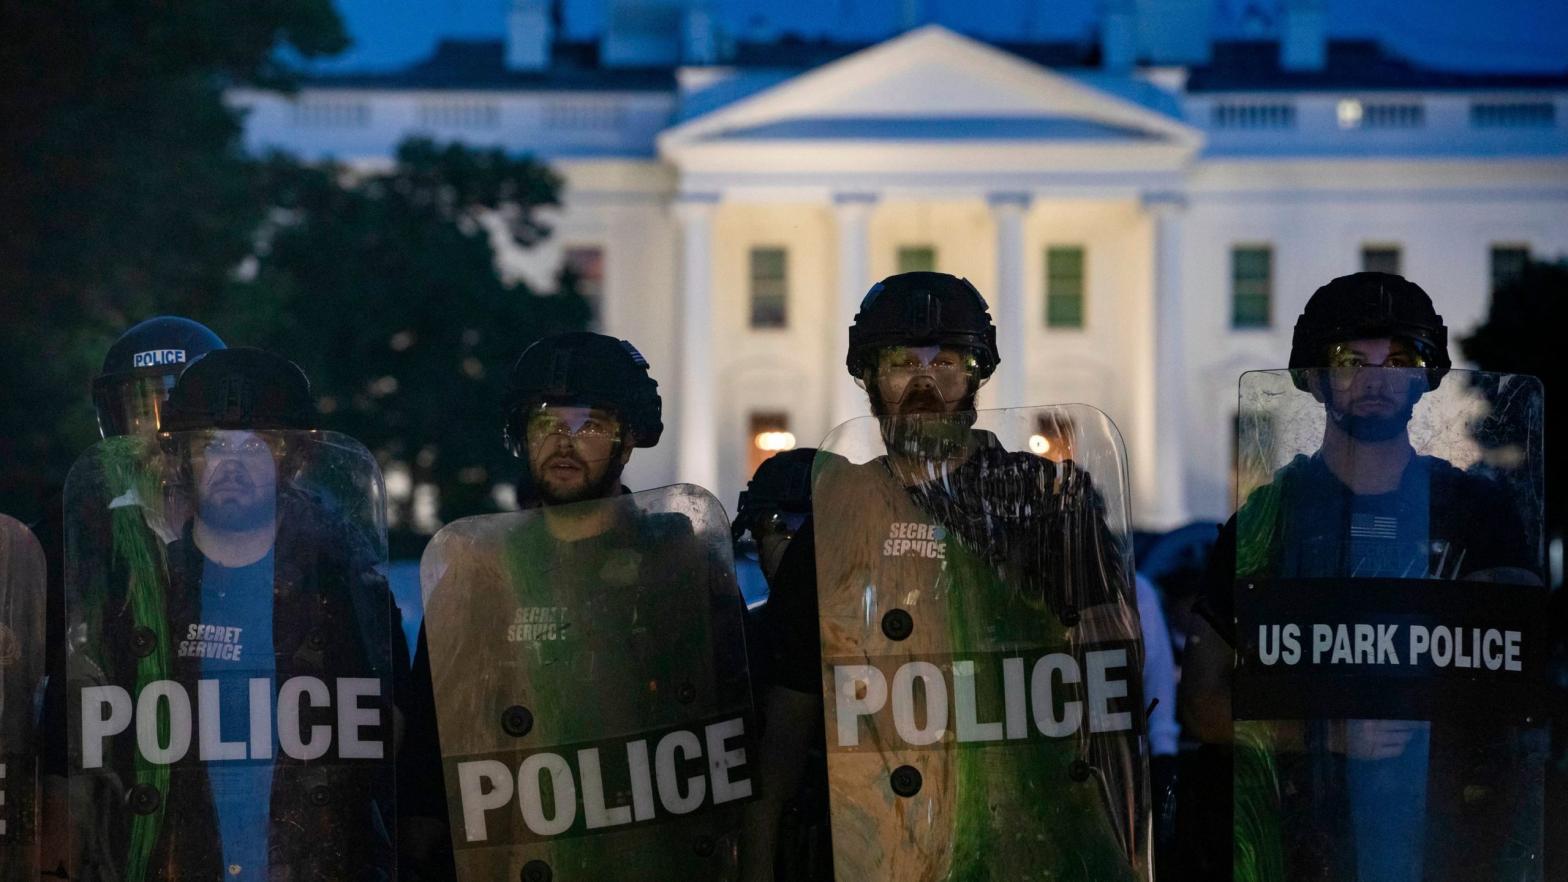 Police outside the White House on May 31, 2020 during protests in Washington, D.C. (Photo: Getty Images)